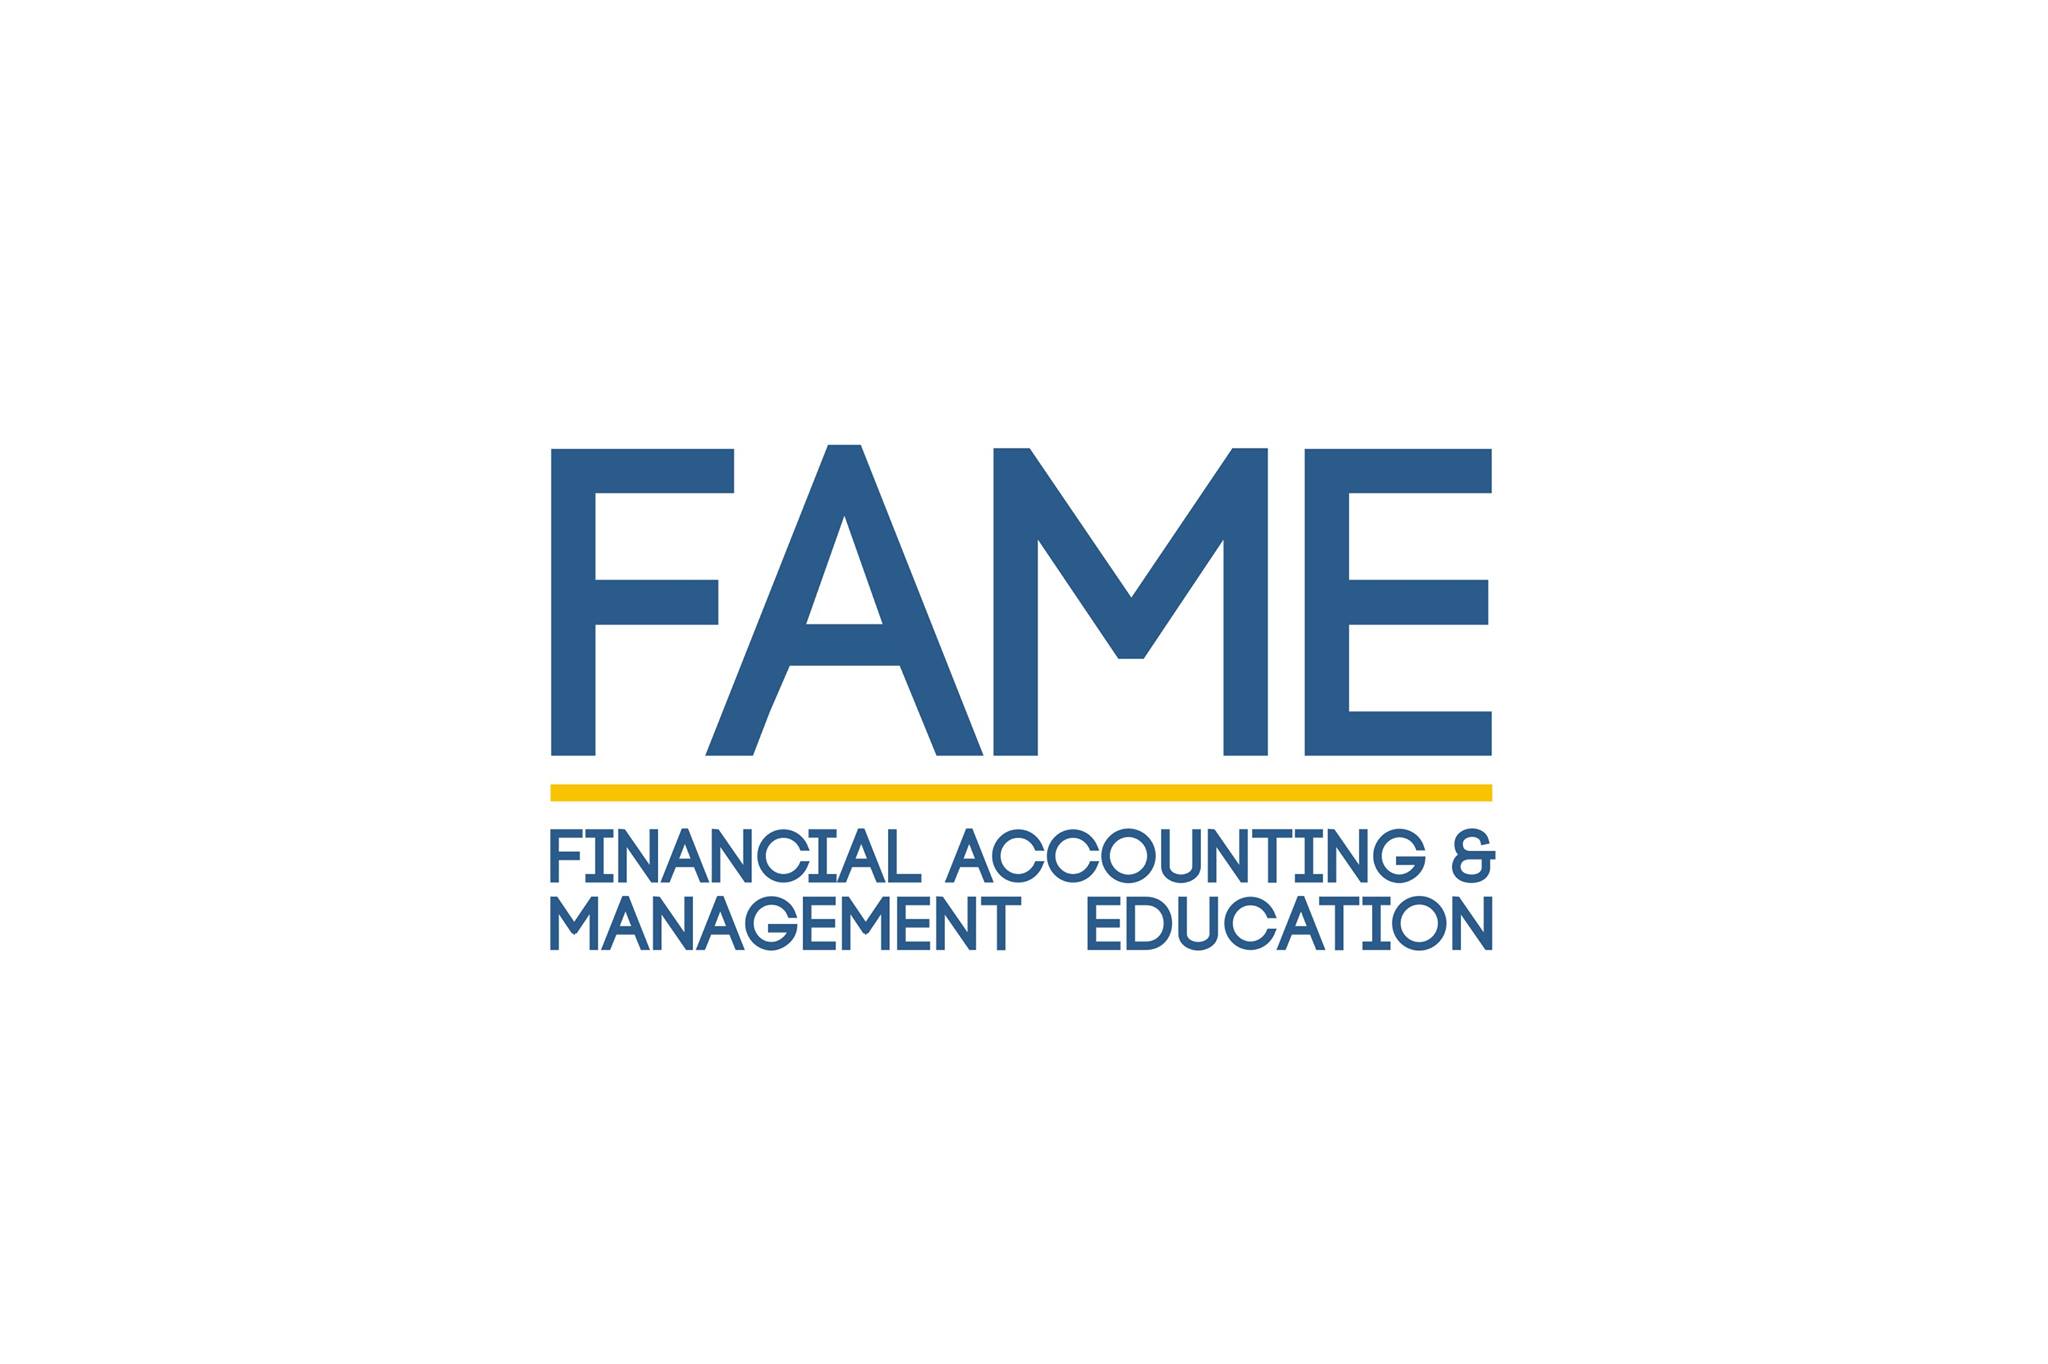 FAME Training Institute (Financial Accounting & Management Education)